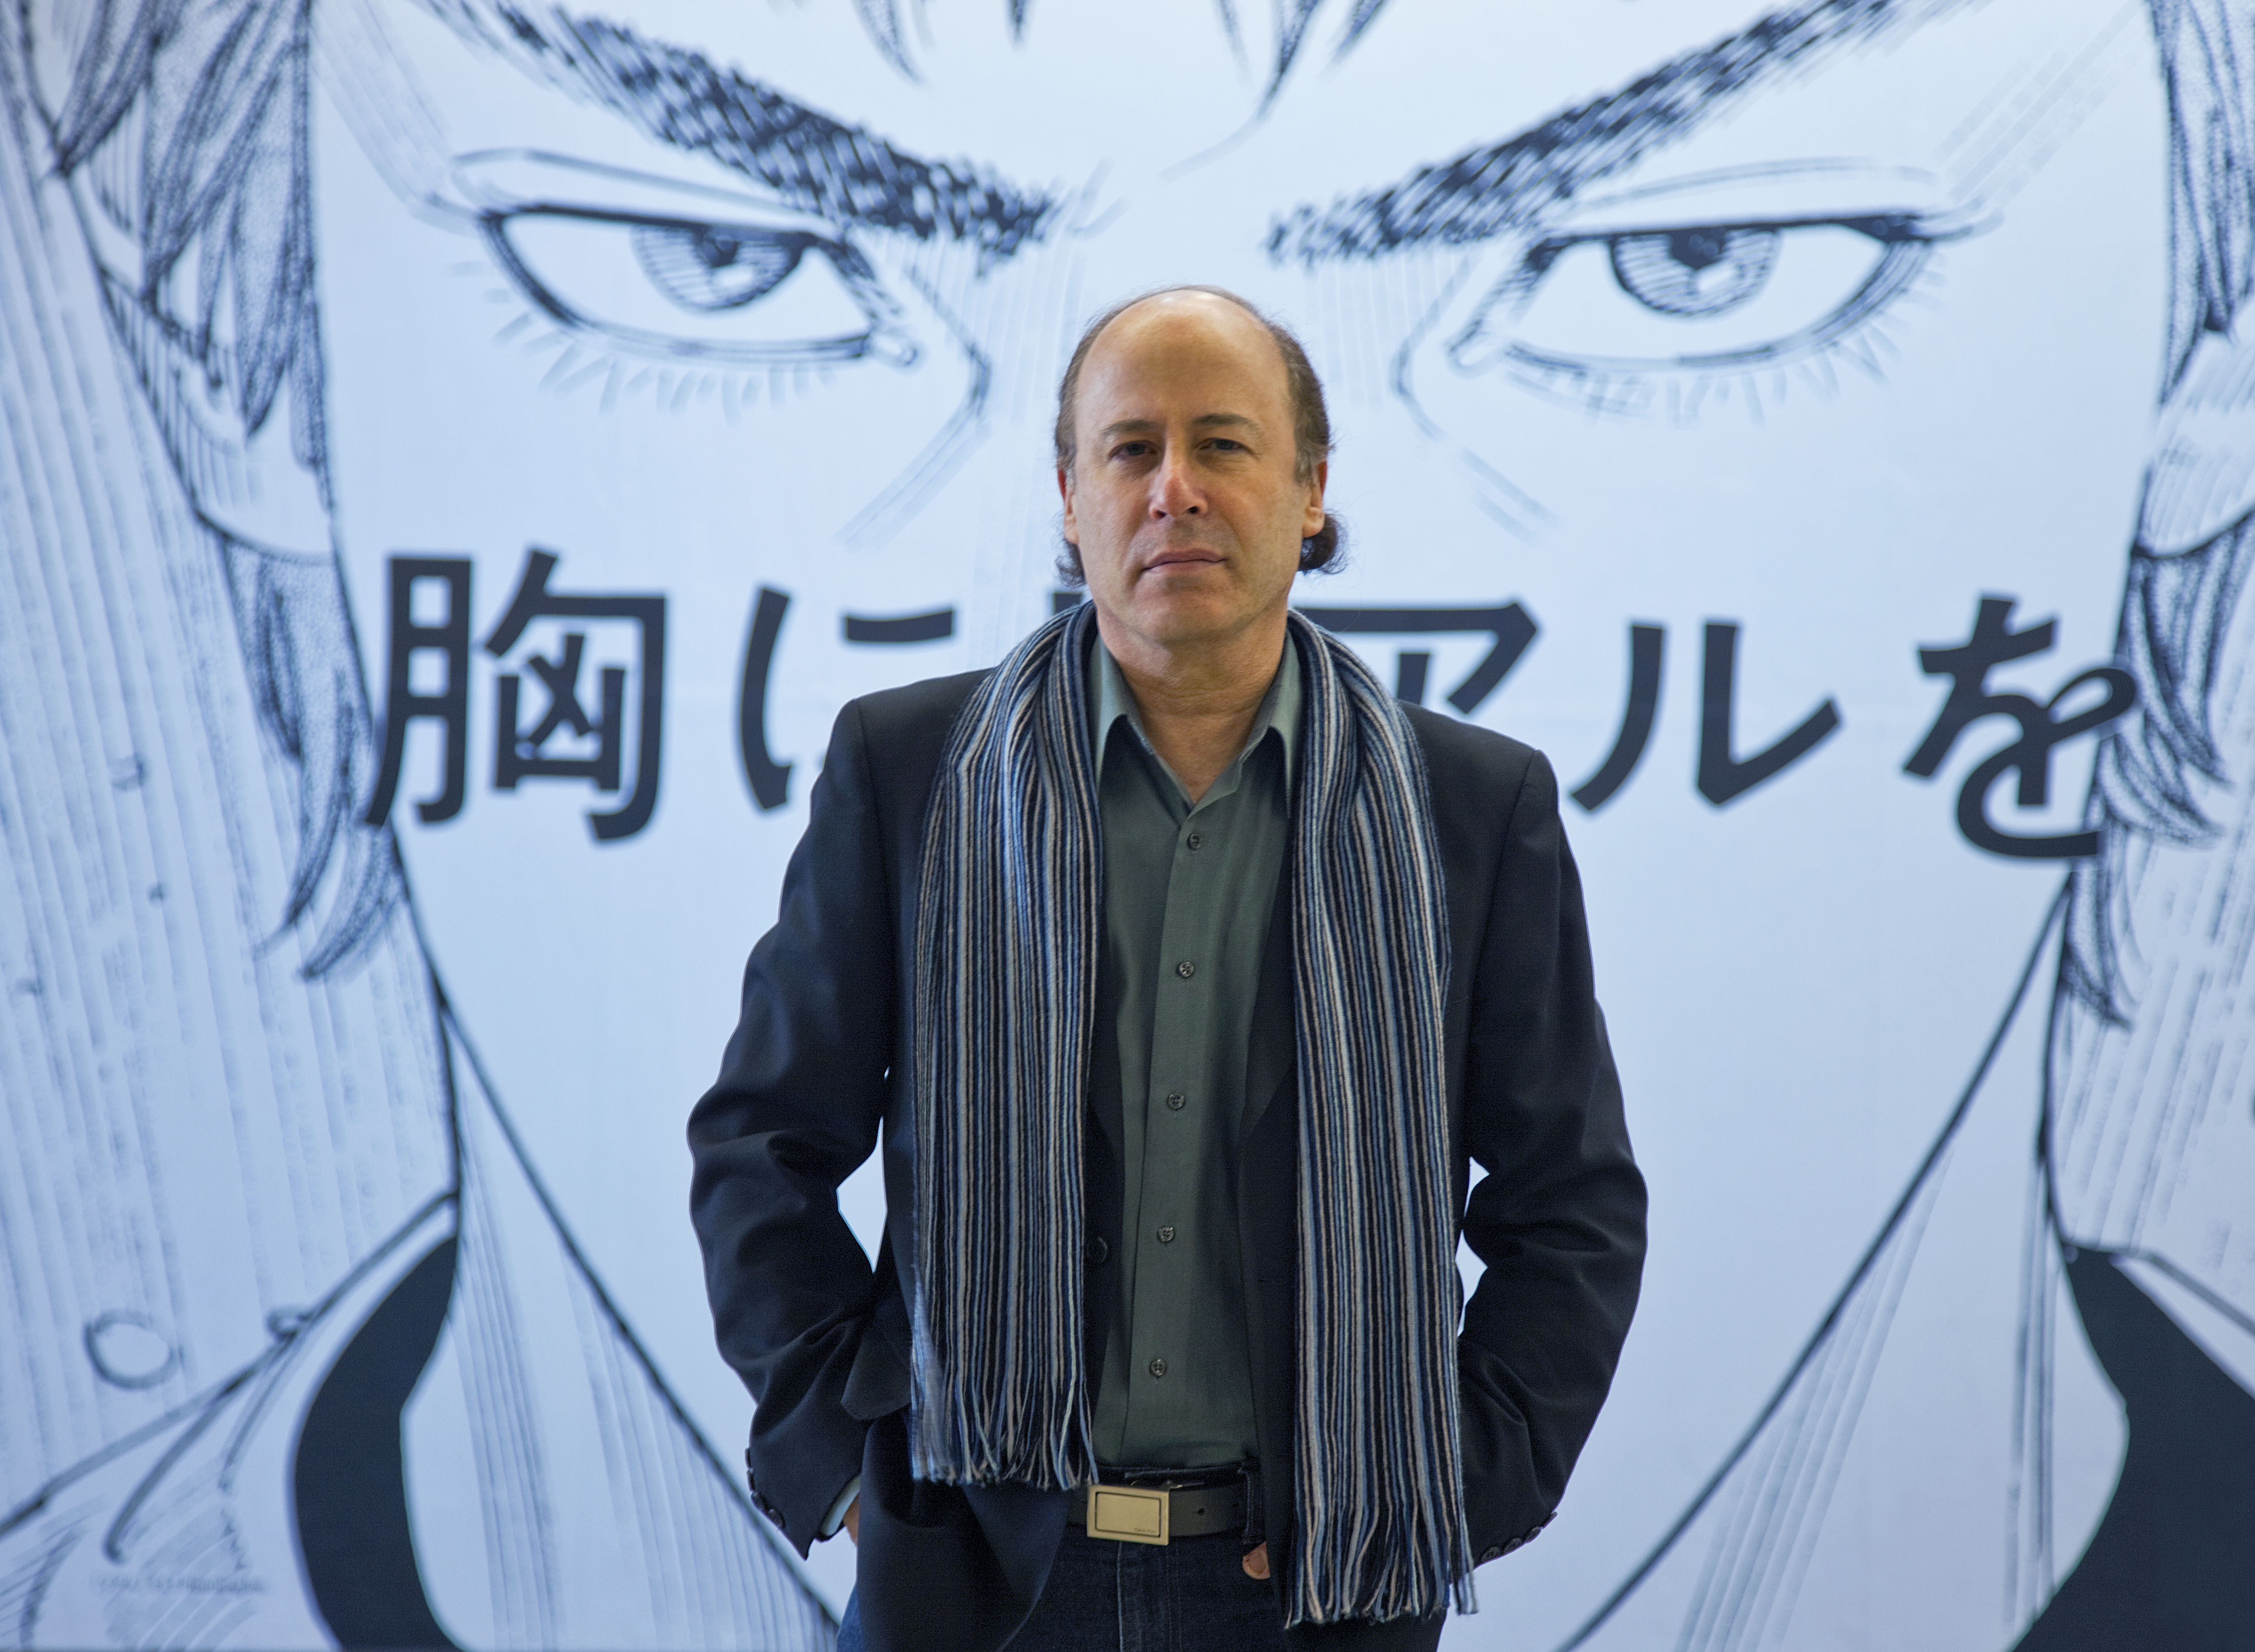 Hardboiled: The core idea behind Barry Lancet’s first novel “Japantown” is to mix his knowledge of Japanese culture with a page-turning thriller. | Ben Simmons